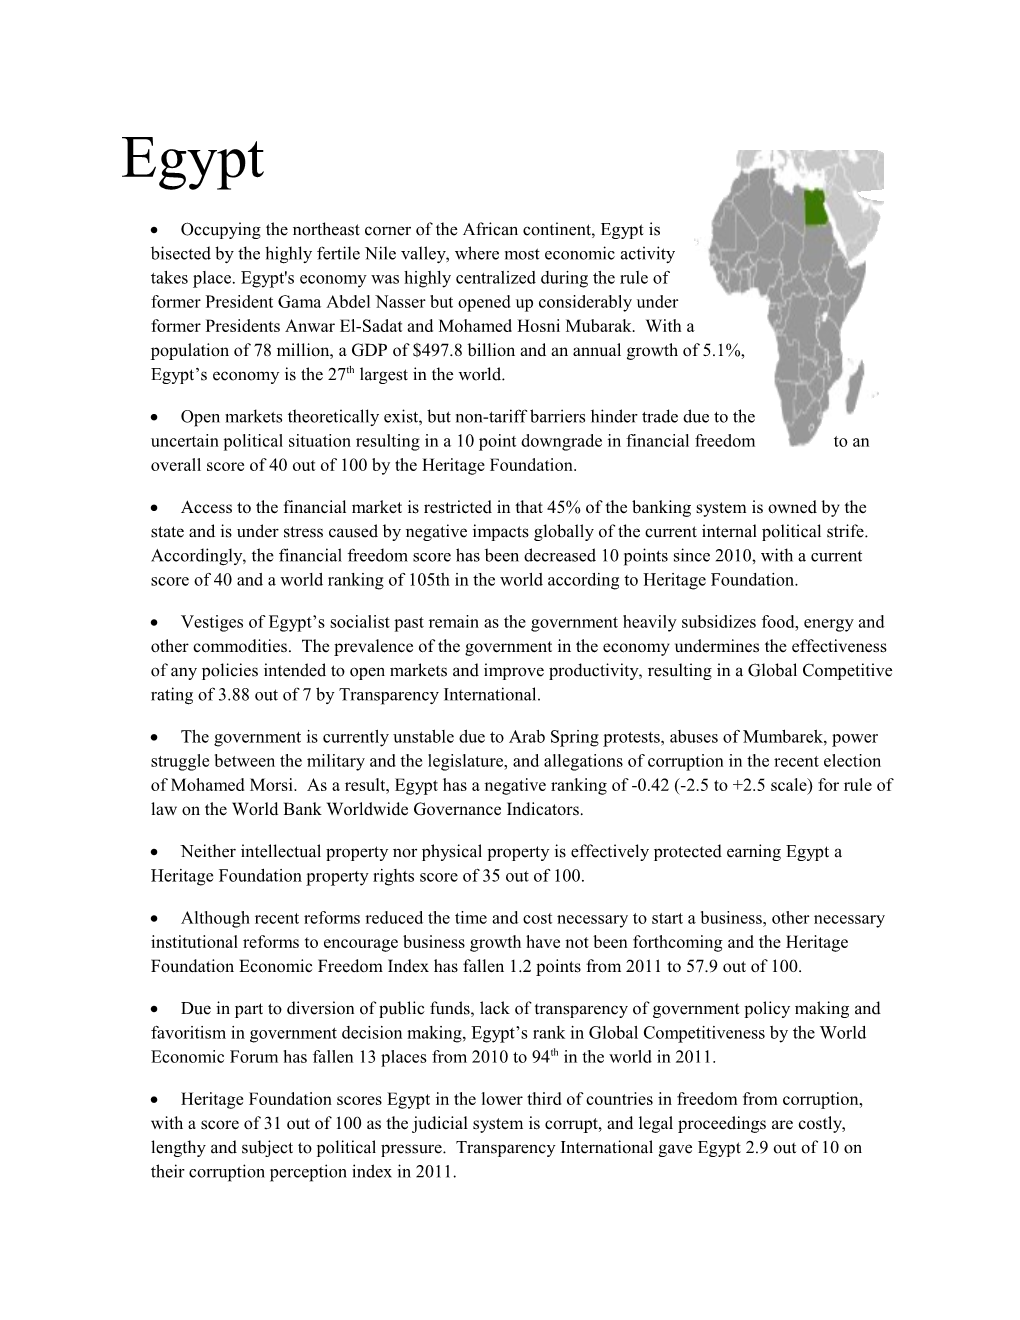 Occupying the Northeast Corner of the African Continent, Egypt Is Bisected by the Highly